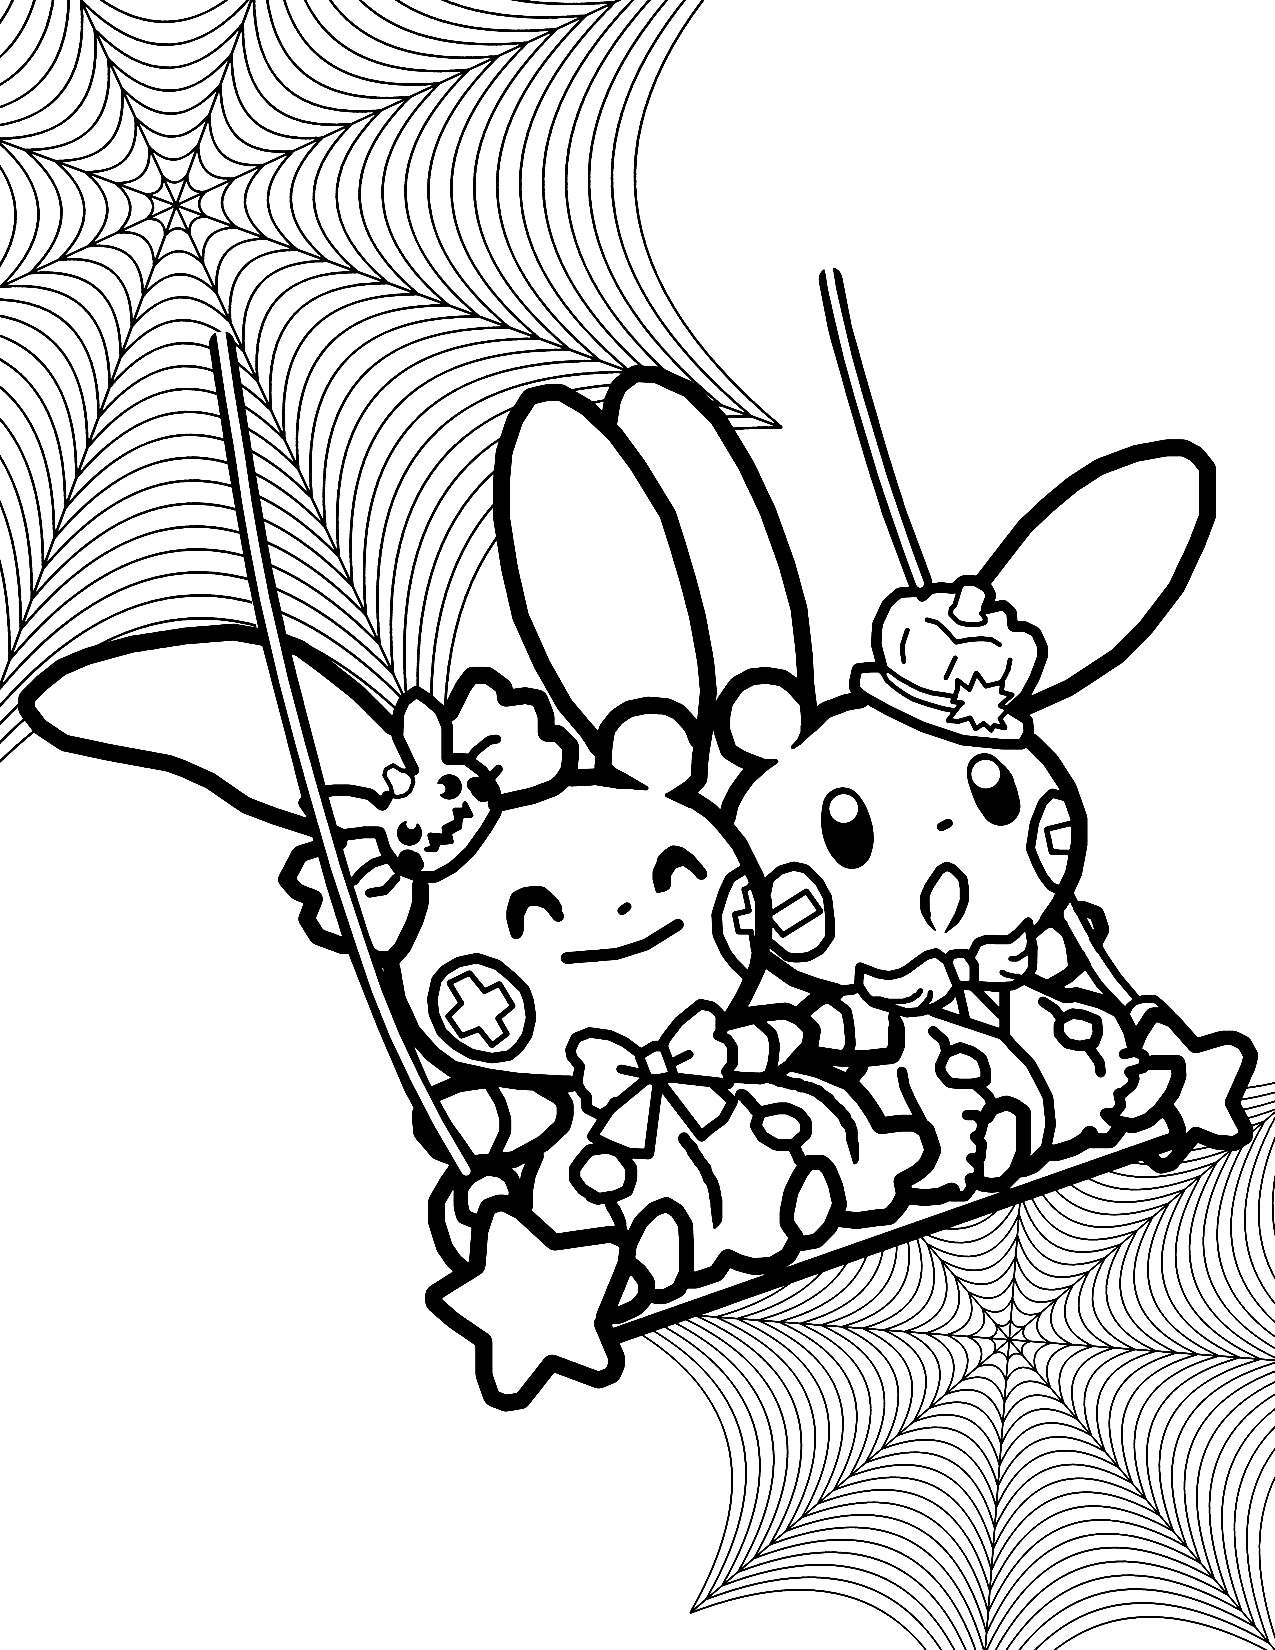 Cute Pokemon Halloween Coloring Pages